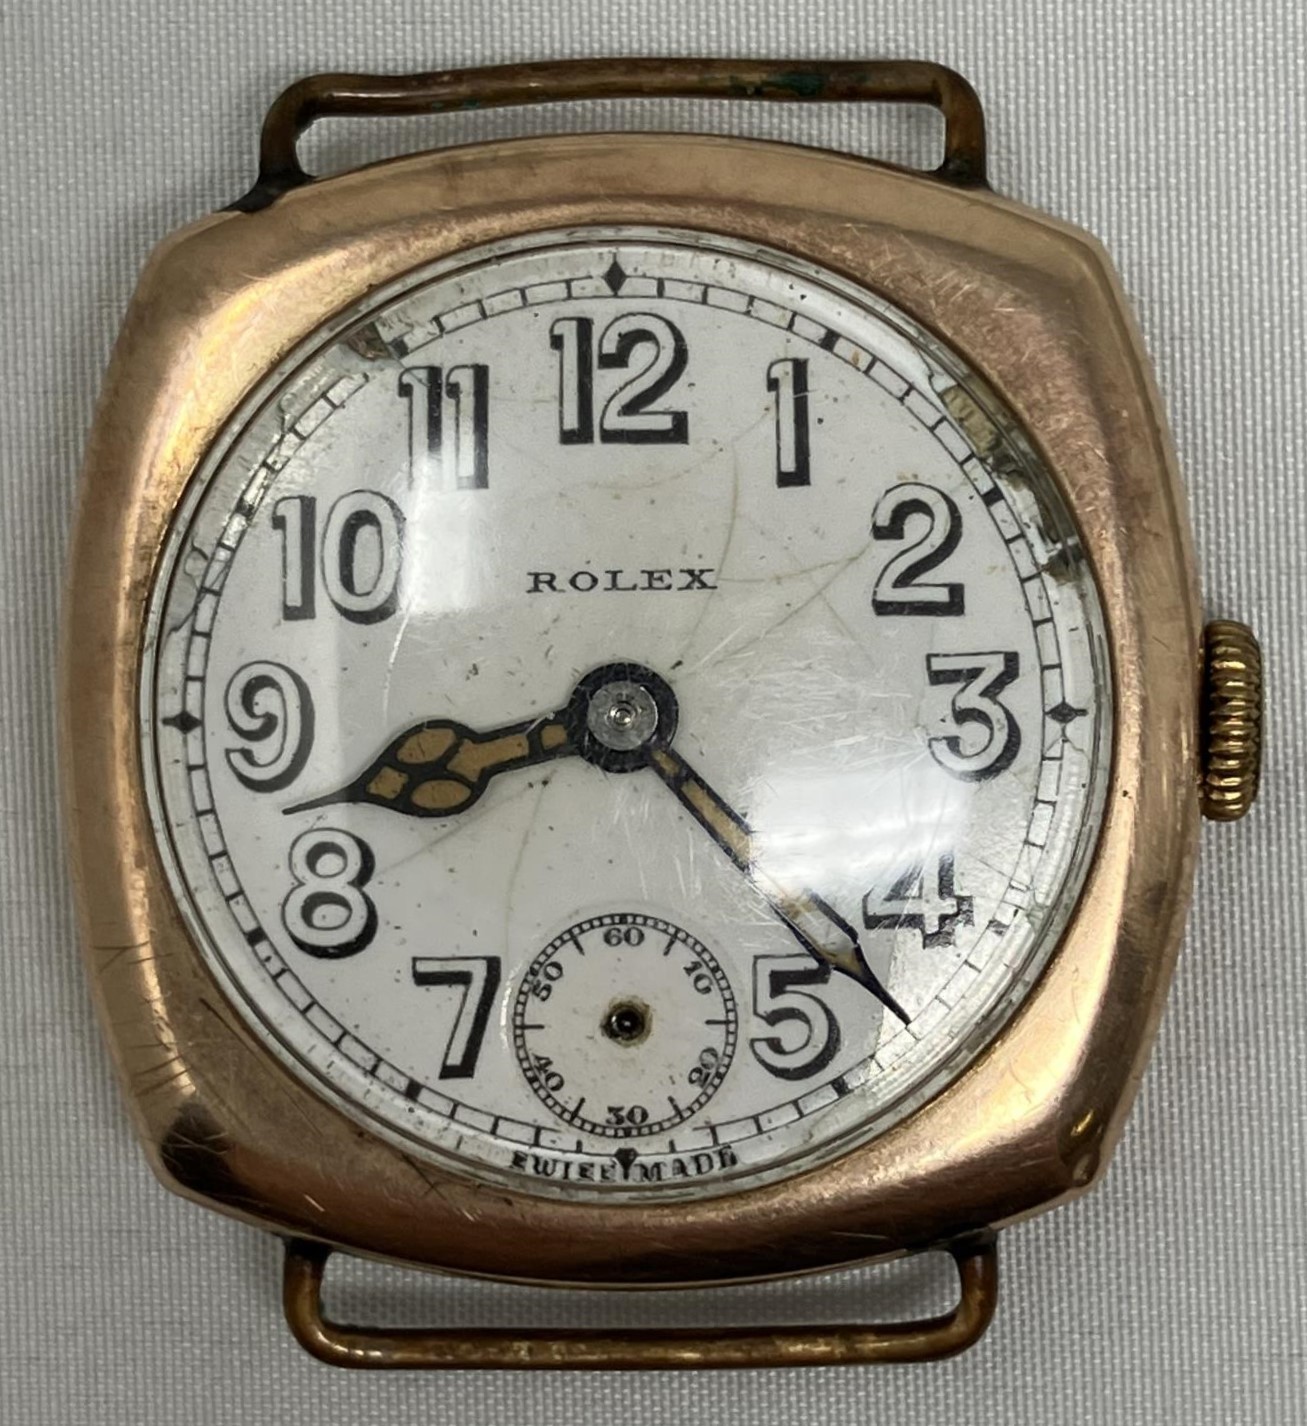 A gentleman's gold Rolex wristwatch, with Arabic numerals and seconds dial Loss of seconds hand,